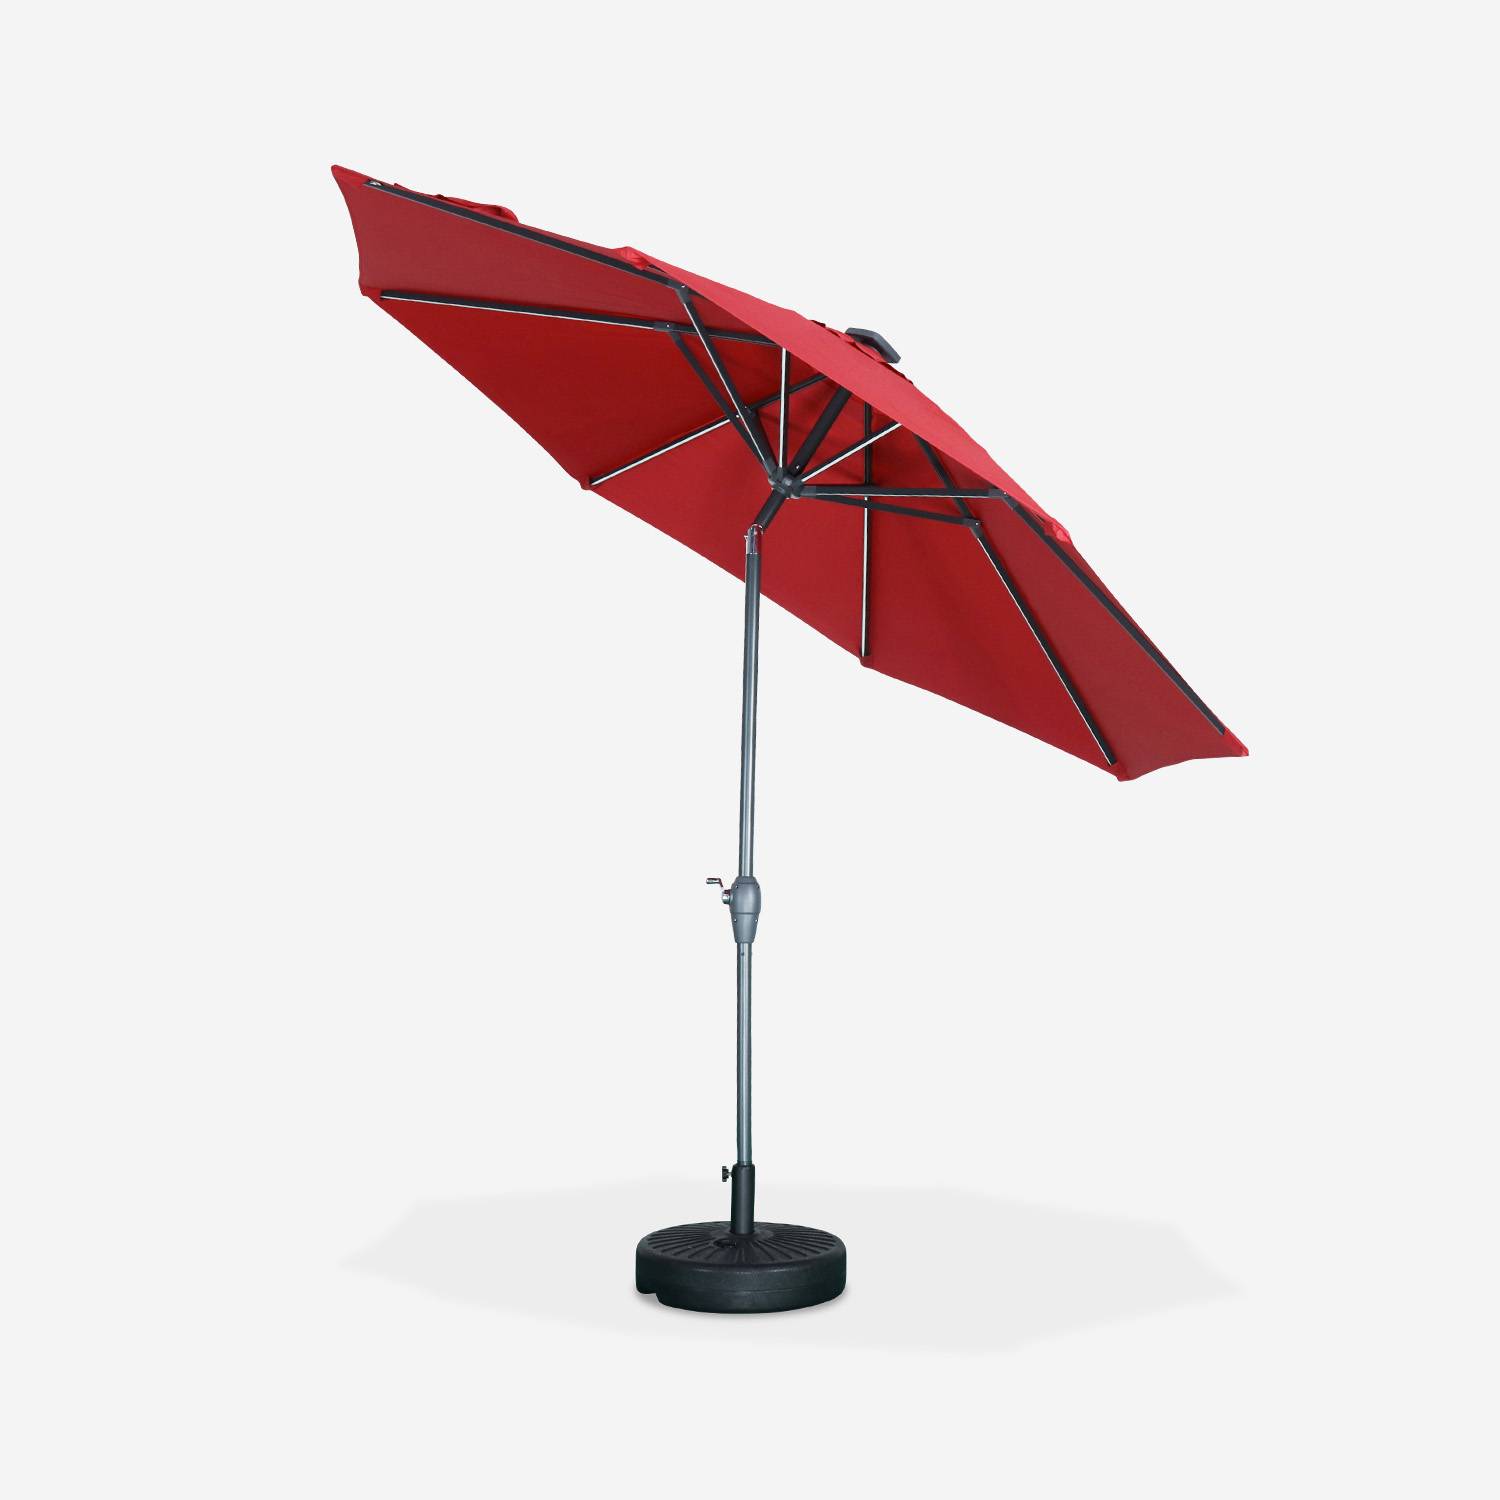 2.7m round centre pole LED parasol - adjustable aluminium central mast and crank handle opening - Helios - Red,sweeek,Photo2